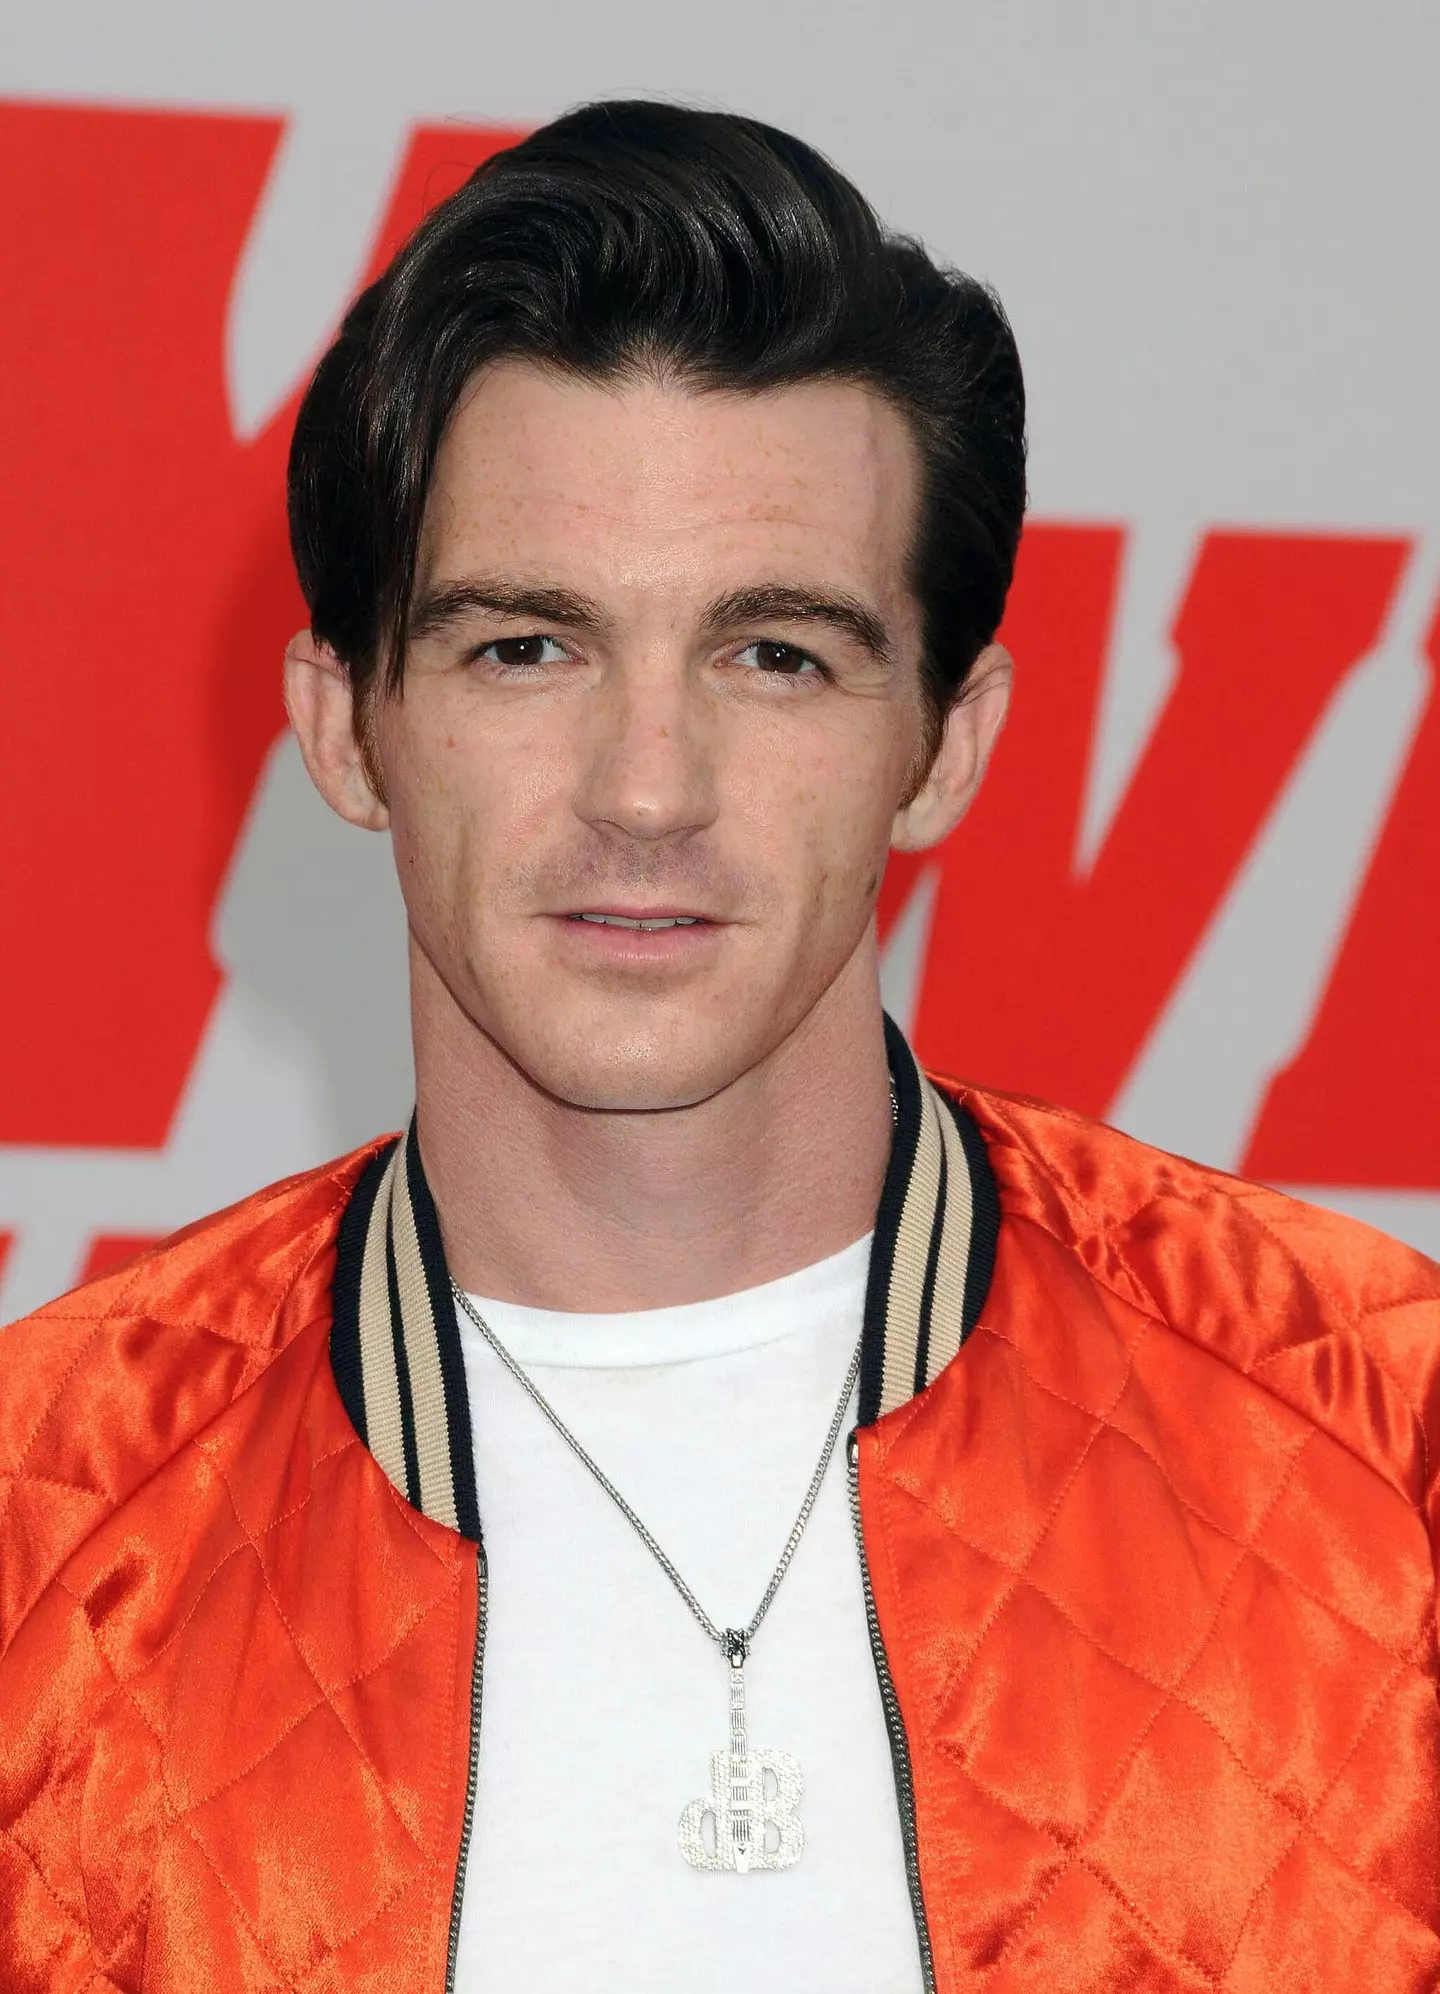 Drake Bell is considered 'missing and endangered'.